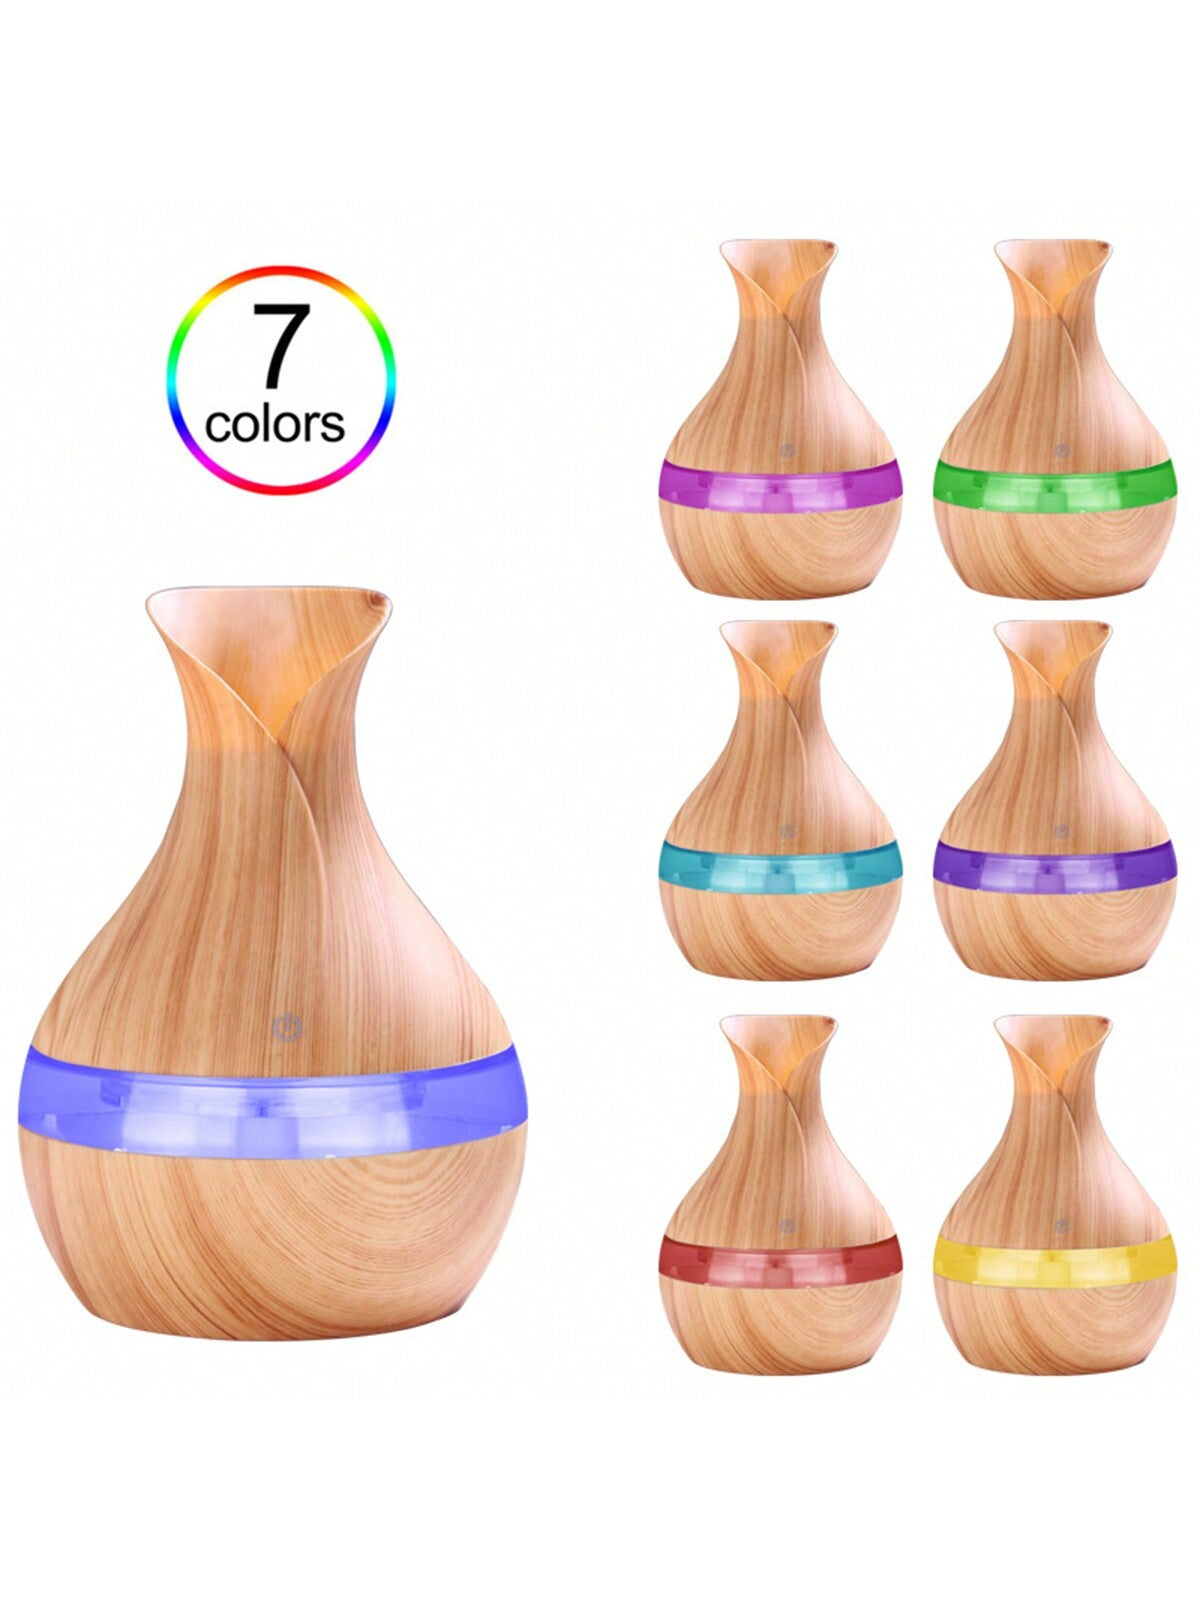 1pc Portable Desktop Usb Wood Grain Humidifier, Aroma Diffuser, Atomizer, Moisturizer, Air Purifier With Flower Vase Design, Suitable For Home, Bedroom, Outdoor, Travel-light wood grain-2